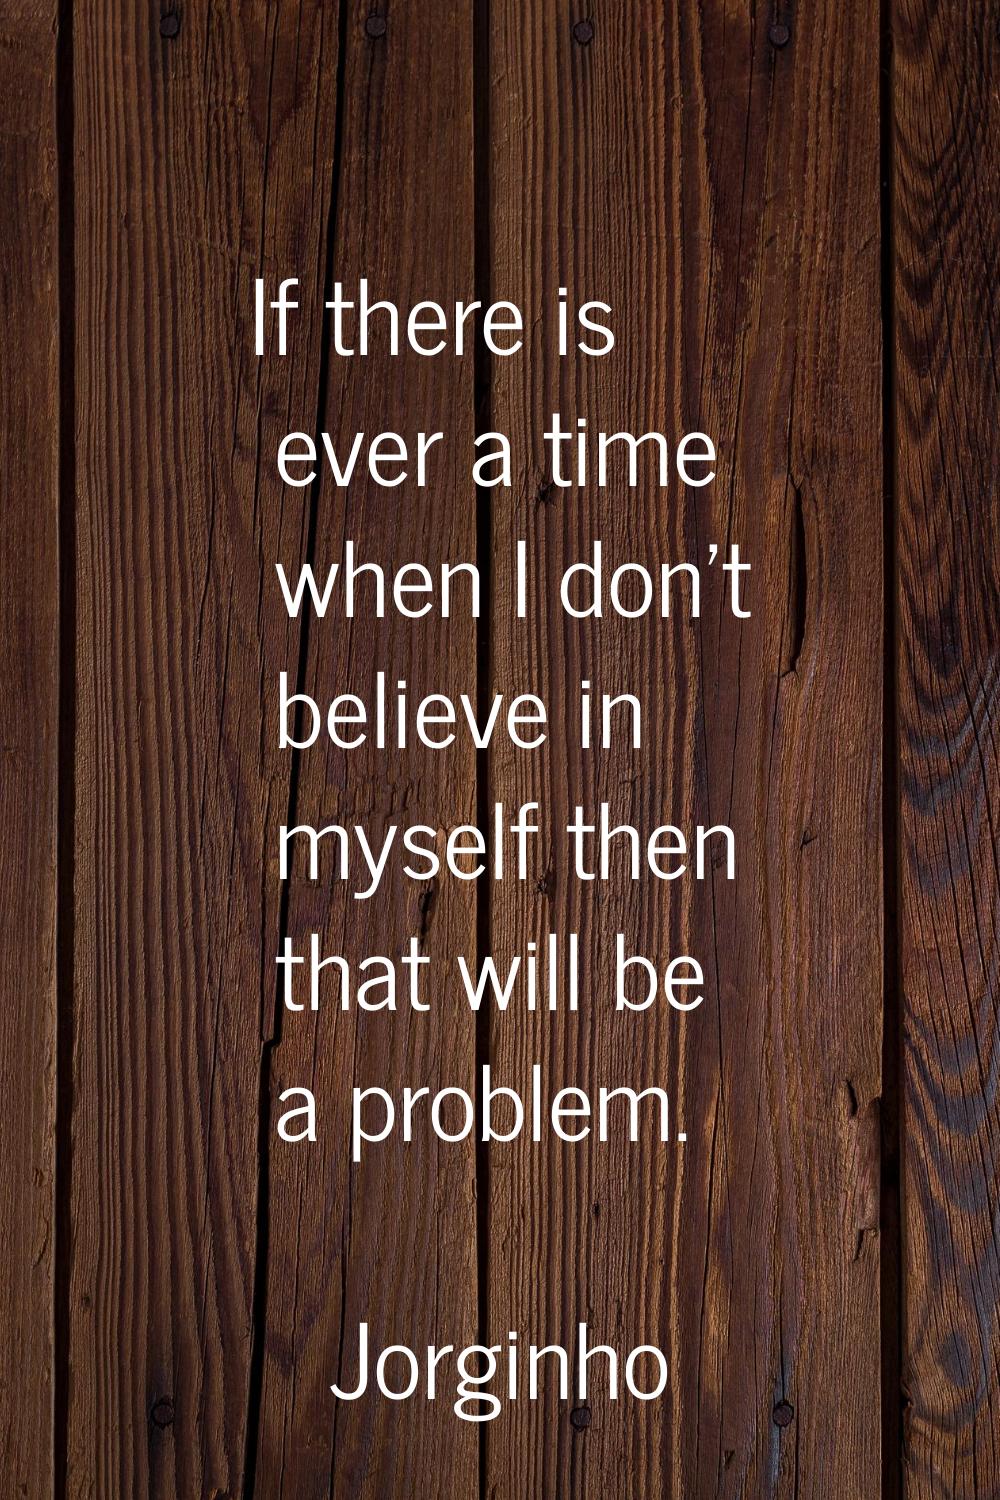 If there is ever a time when I don't believe in myself then that will be a problem.